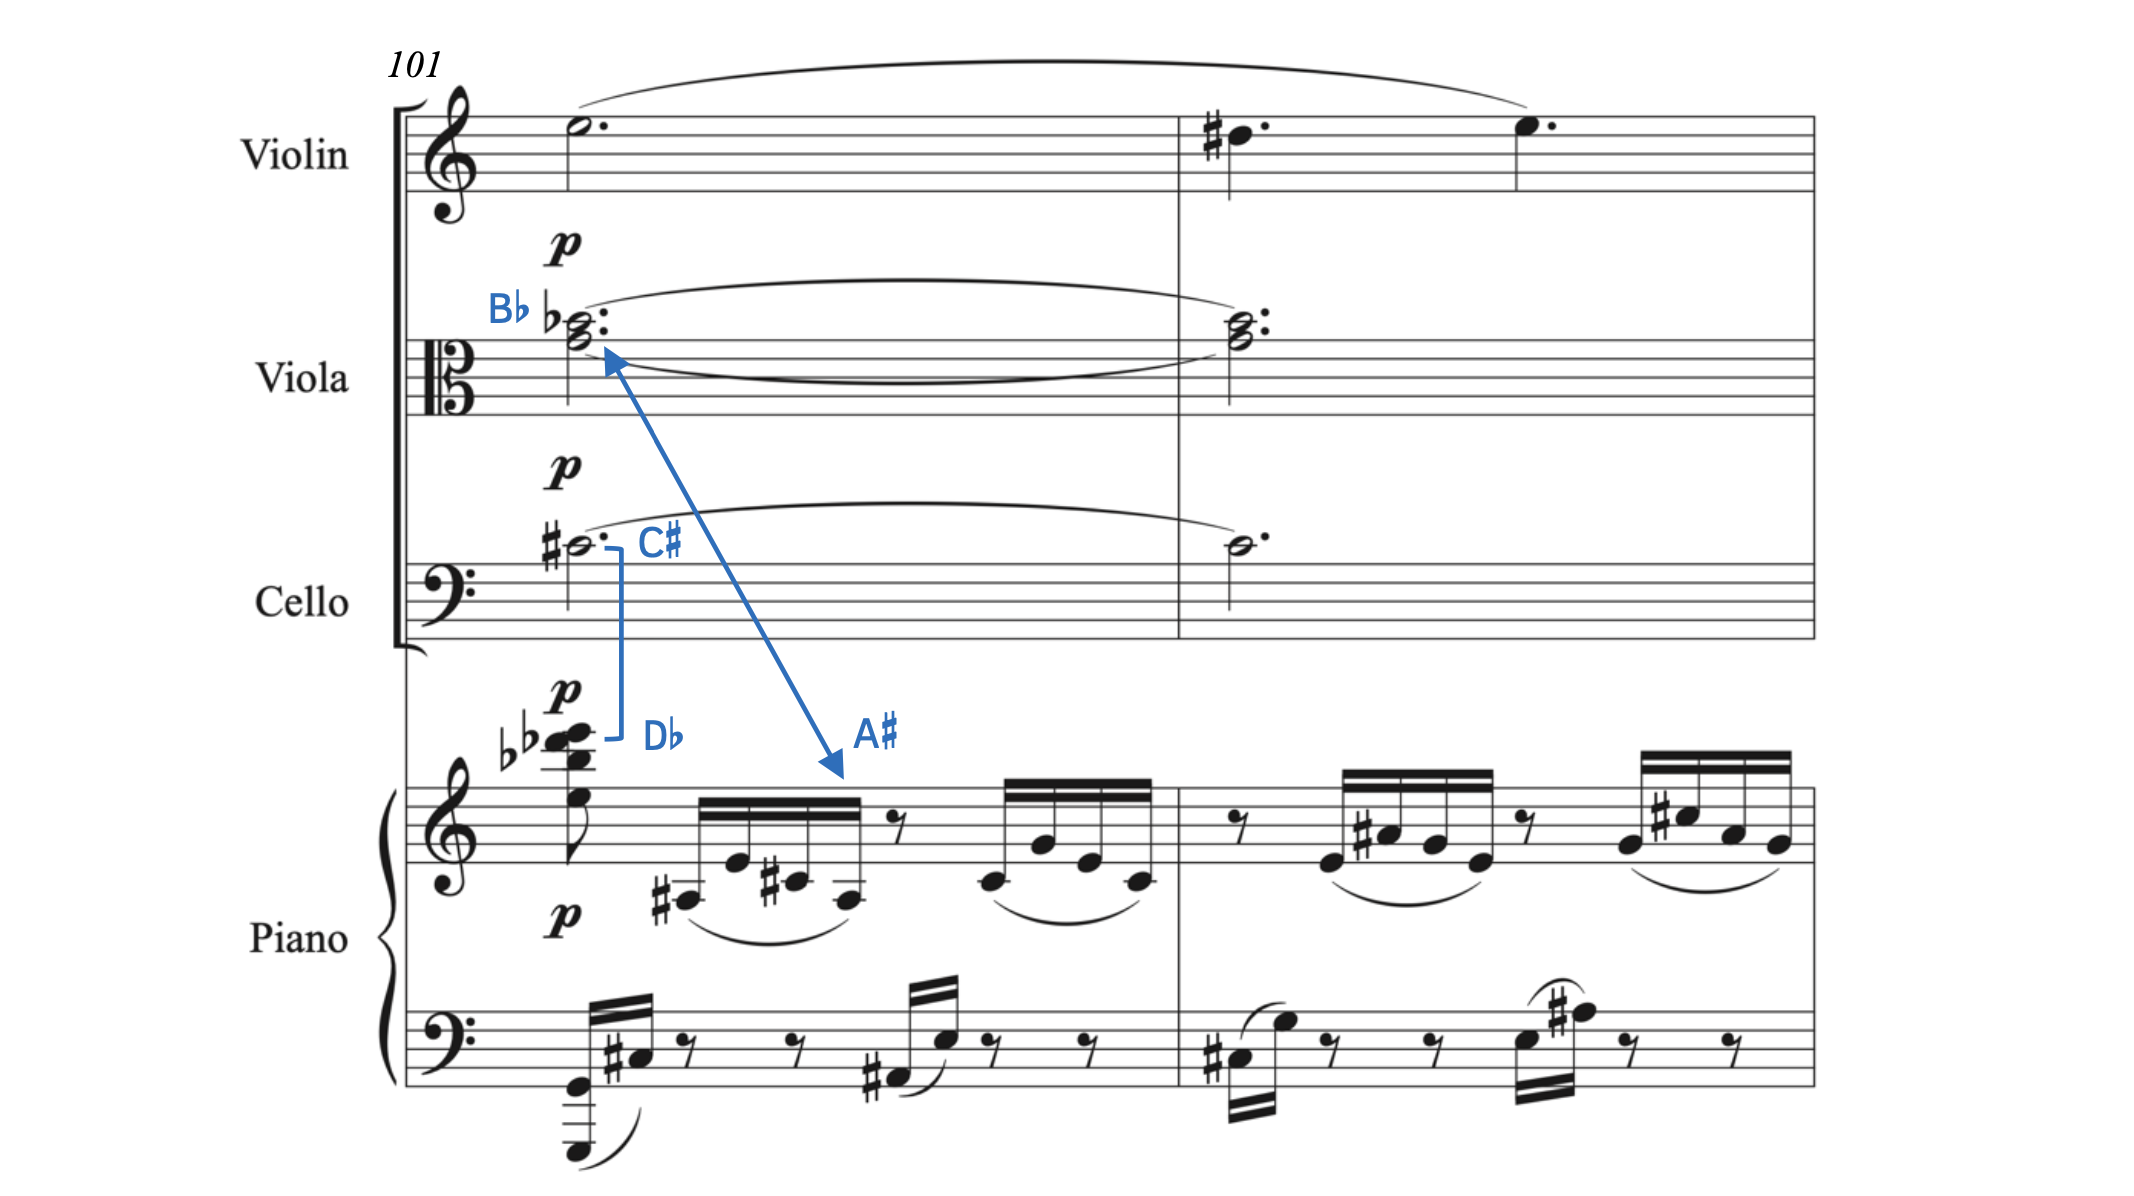 Musical example of simultaneous uses of enharmonic equivalents in Le Beau's Piano Quartet, Op. 28 – Finale. Allegro. The viola plays B-flat while the piano has A-sharp. B-flat and A-sharp are enharmonic equivalents. Also, the cello plays C-sharp while the piano plays D-flat. C-sharp and D-flat are enharmonically equivalent.